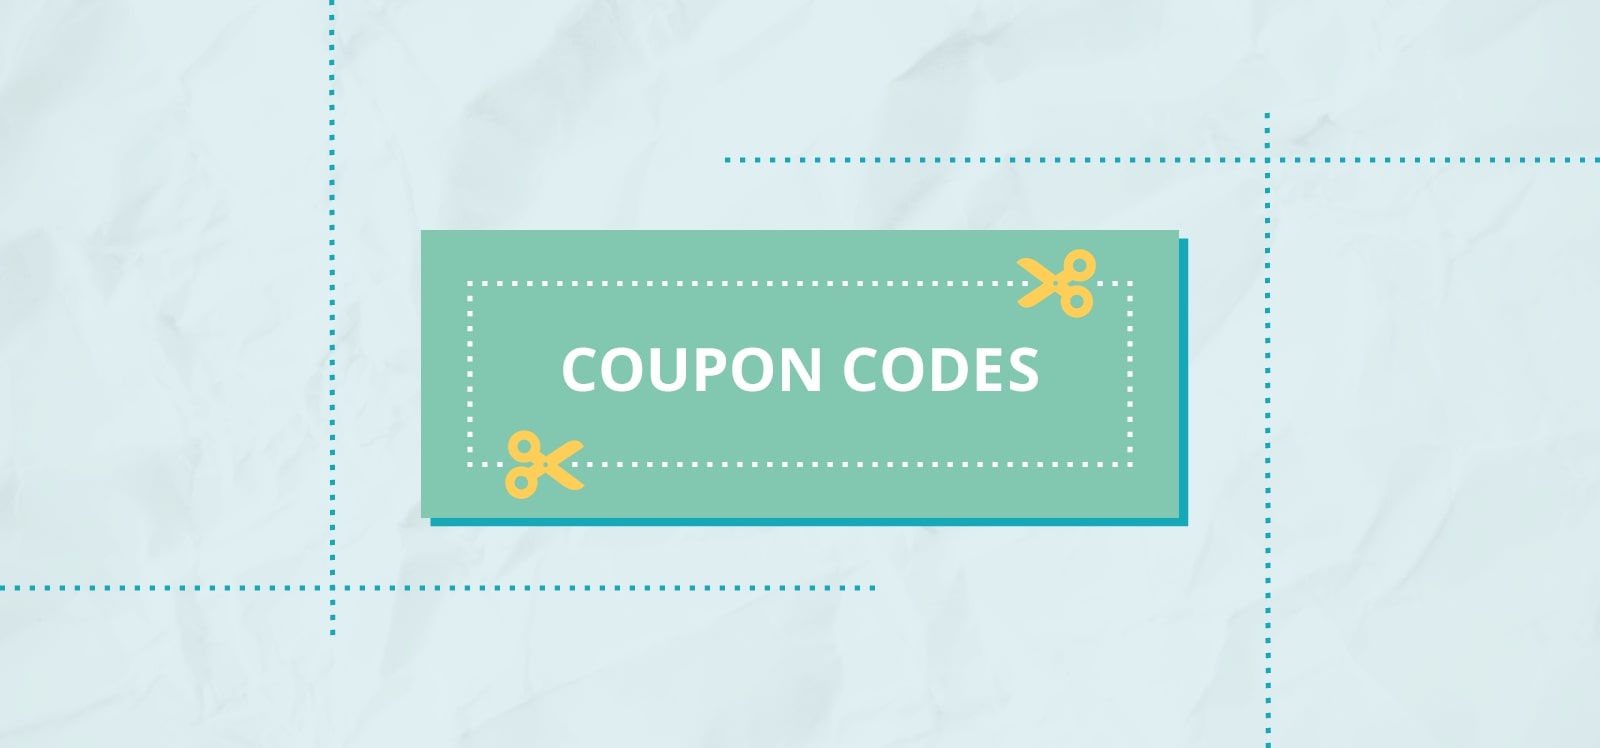 Use coupon codes to optimize conversion for your Shopify store.